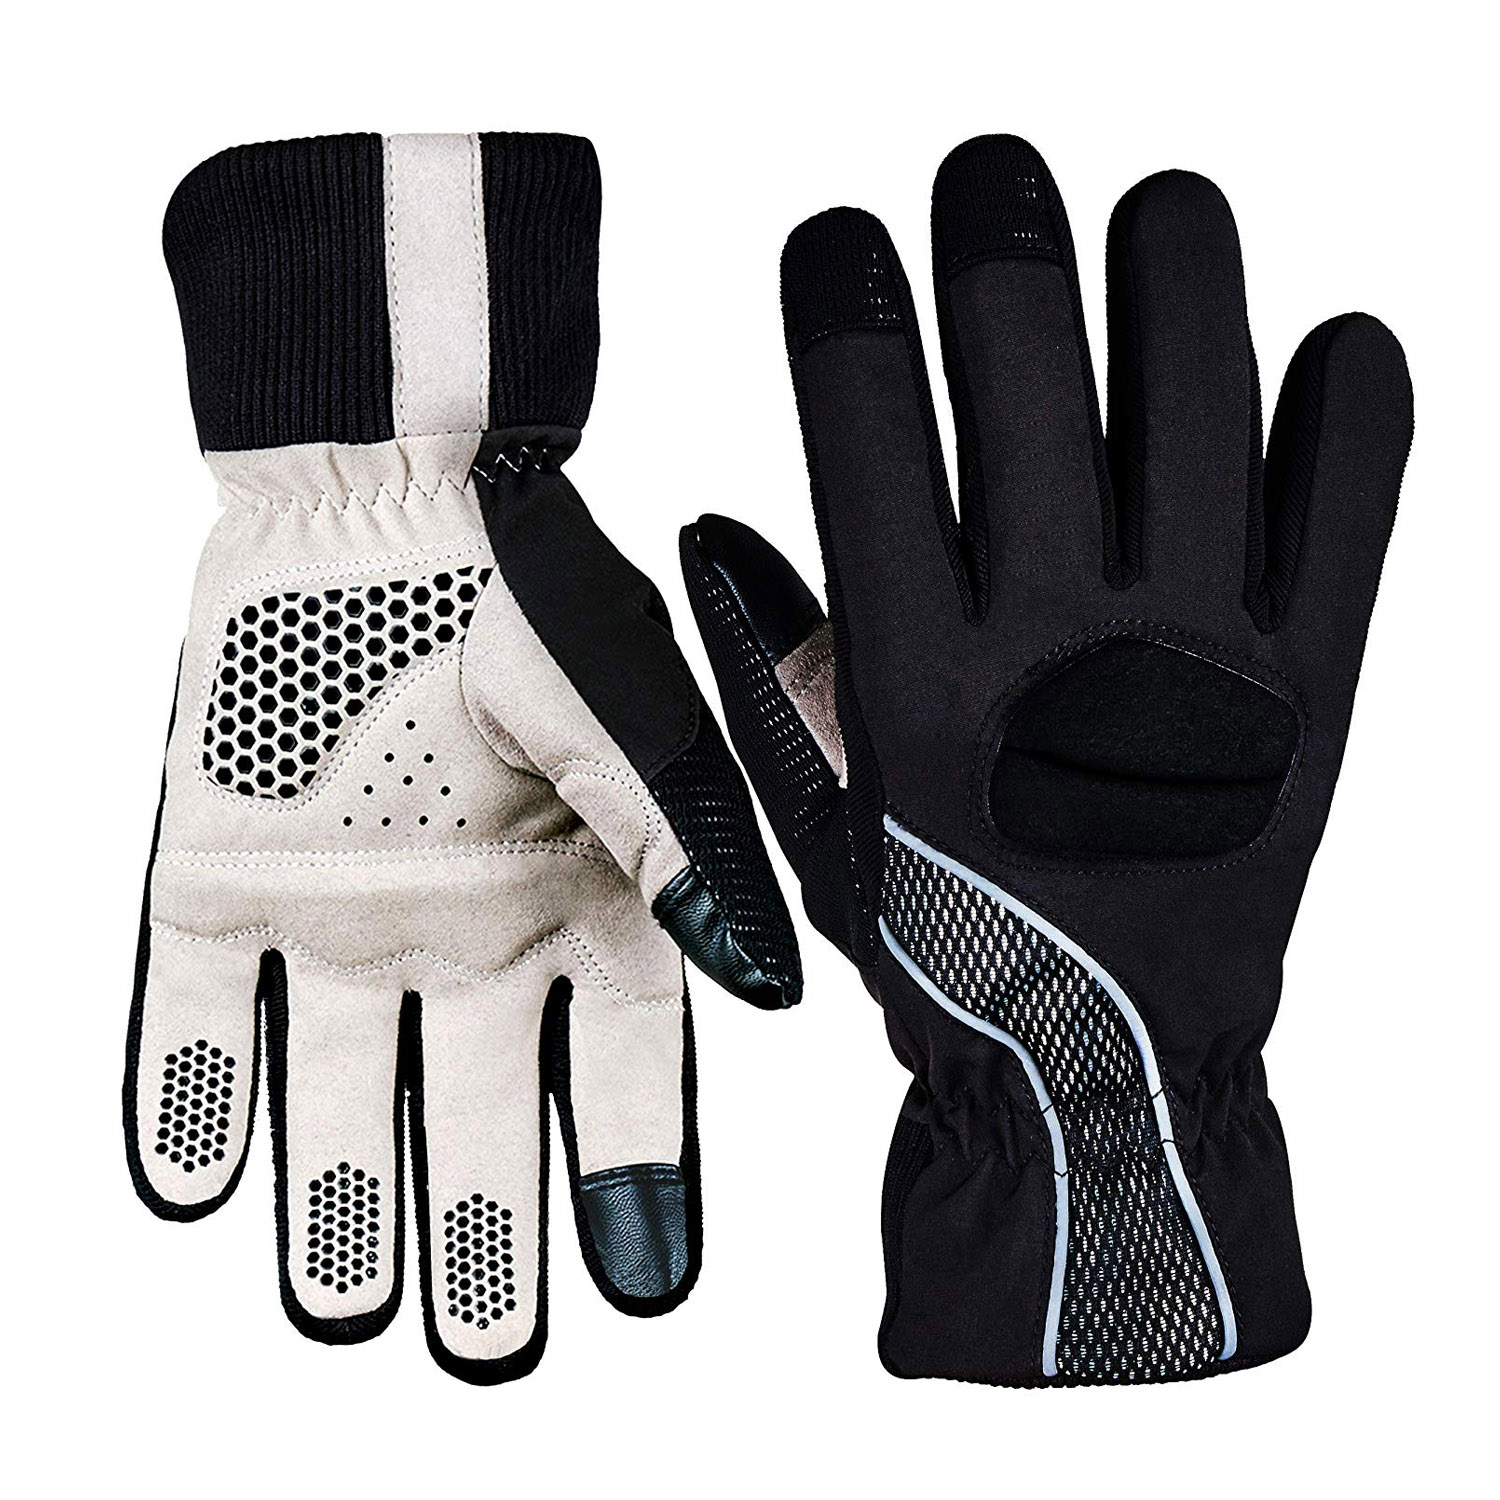 Winter Reflective Warm Insulated Touch Screen Gel Padding Ski Gloves